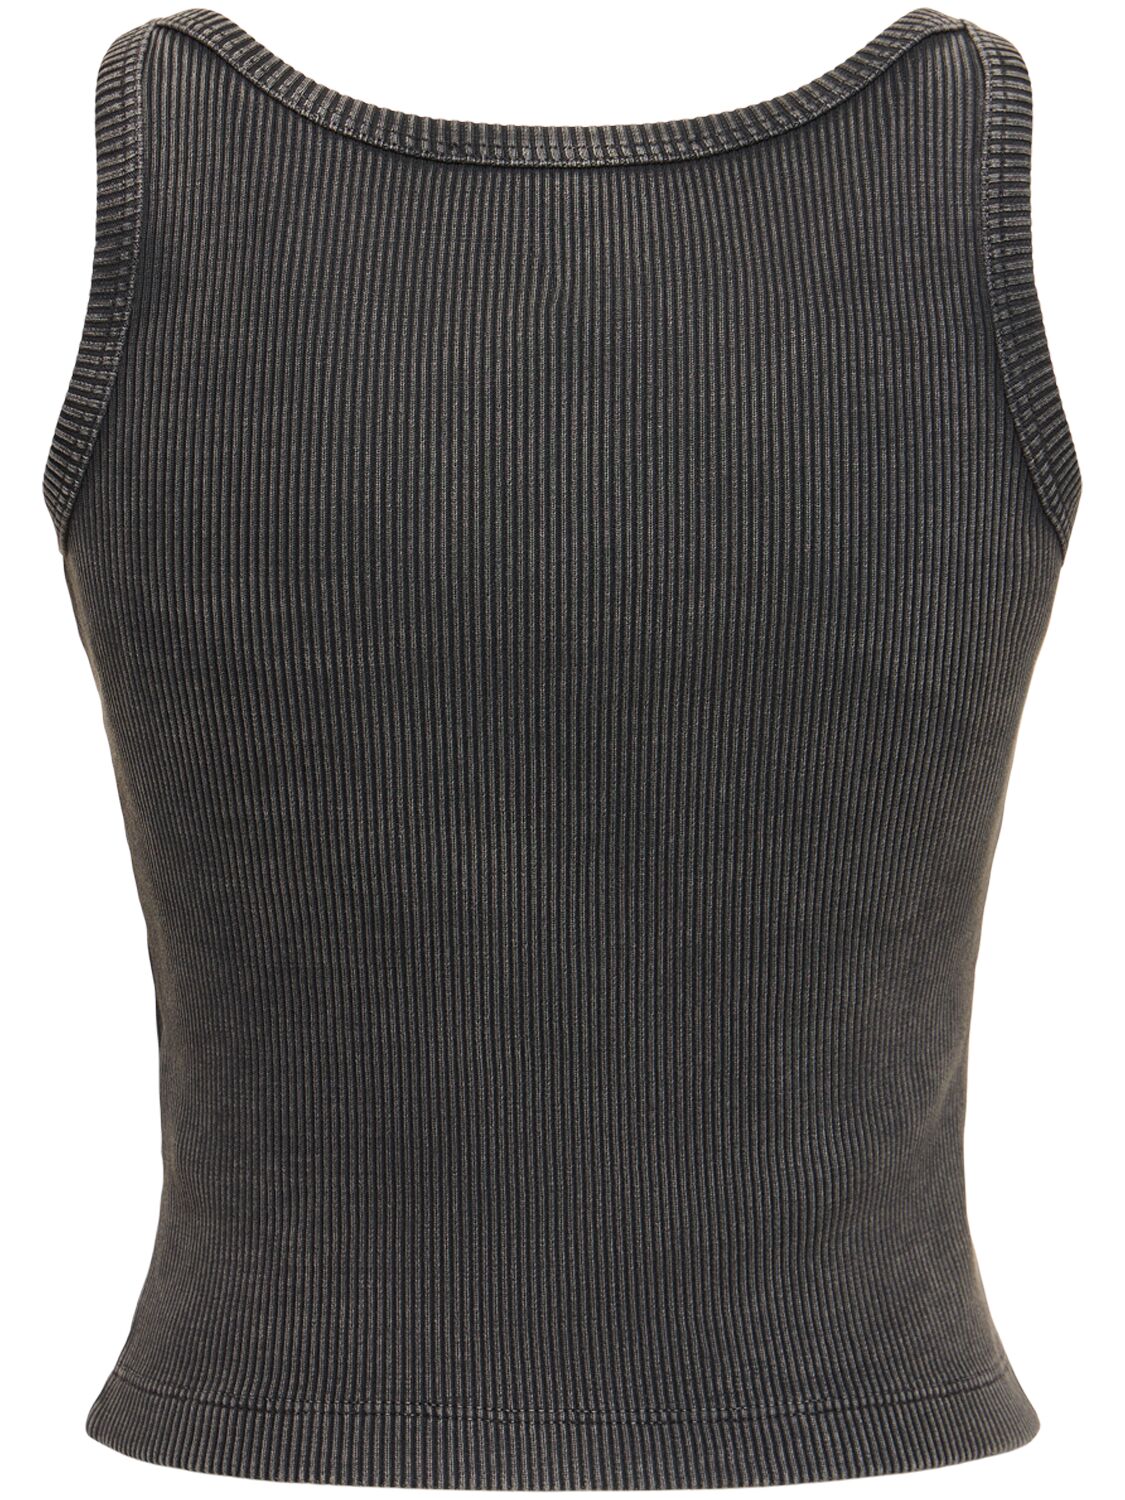 Shop Alessandra Rich Ribbed Jersey Sleeveless Top W/ Patch In Dark Grey